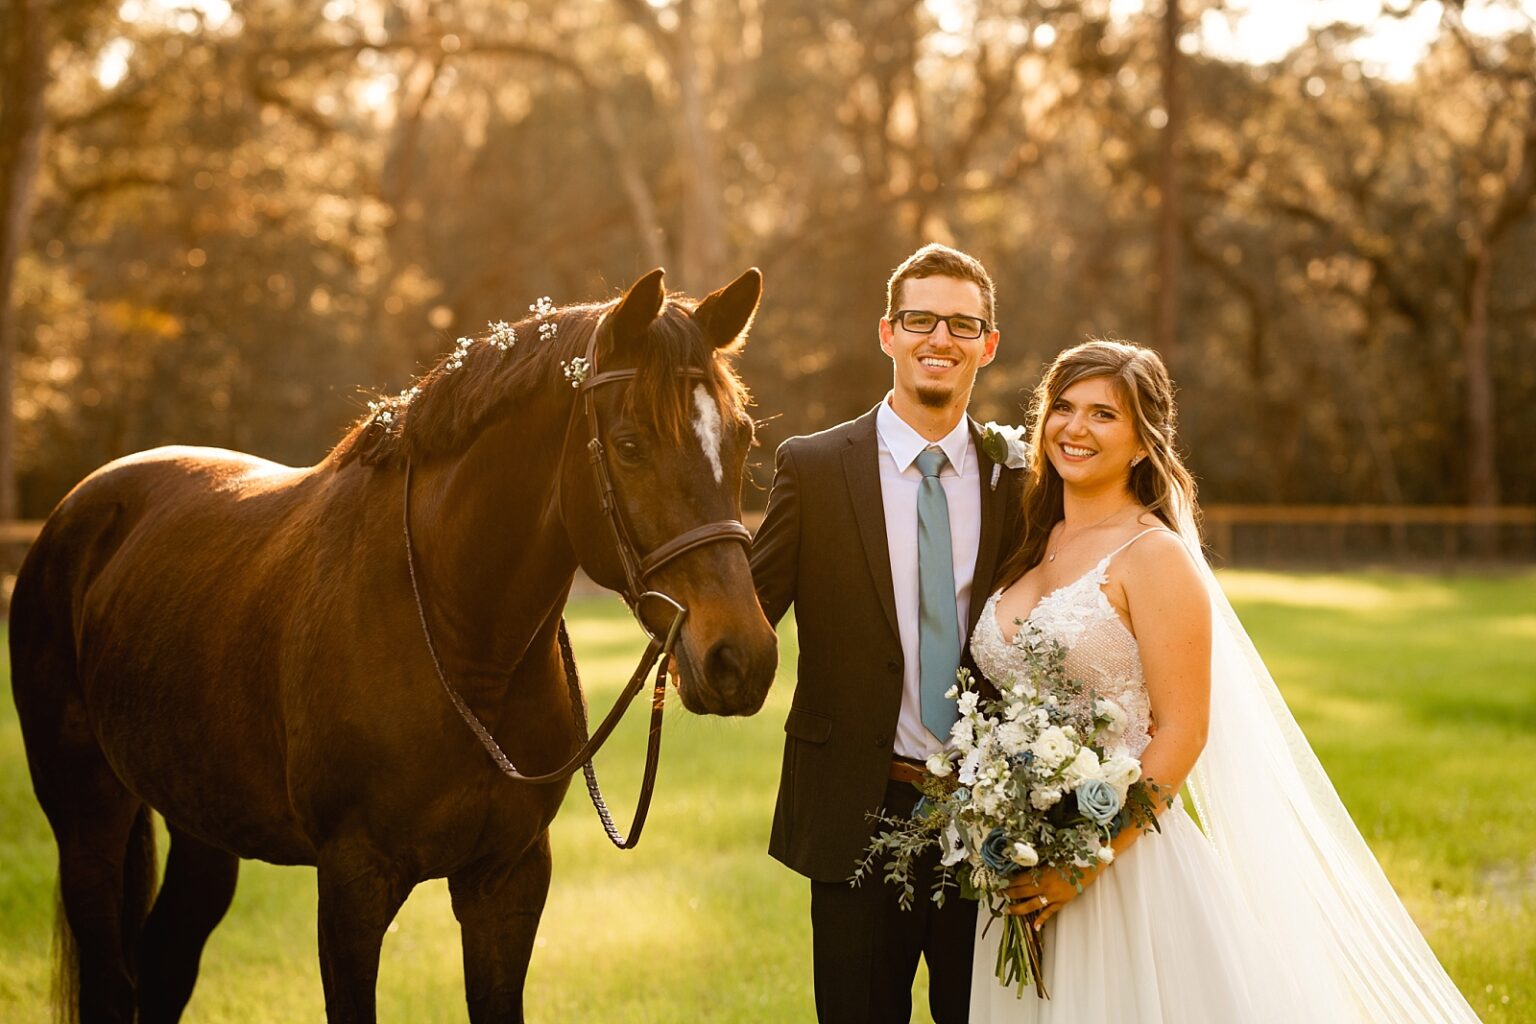 Wedding ideas with horses. Babys breath in horses mane. Bride and groom take photos with horse during sunset.